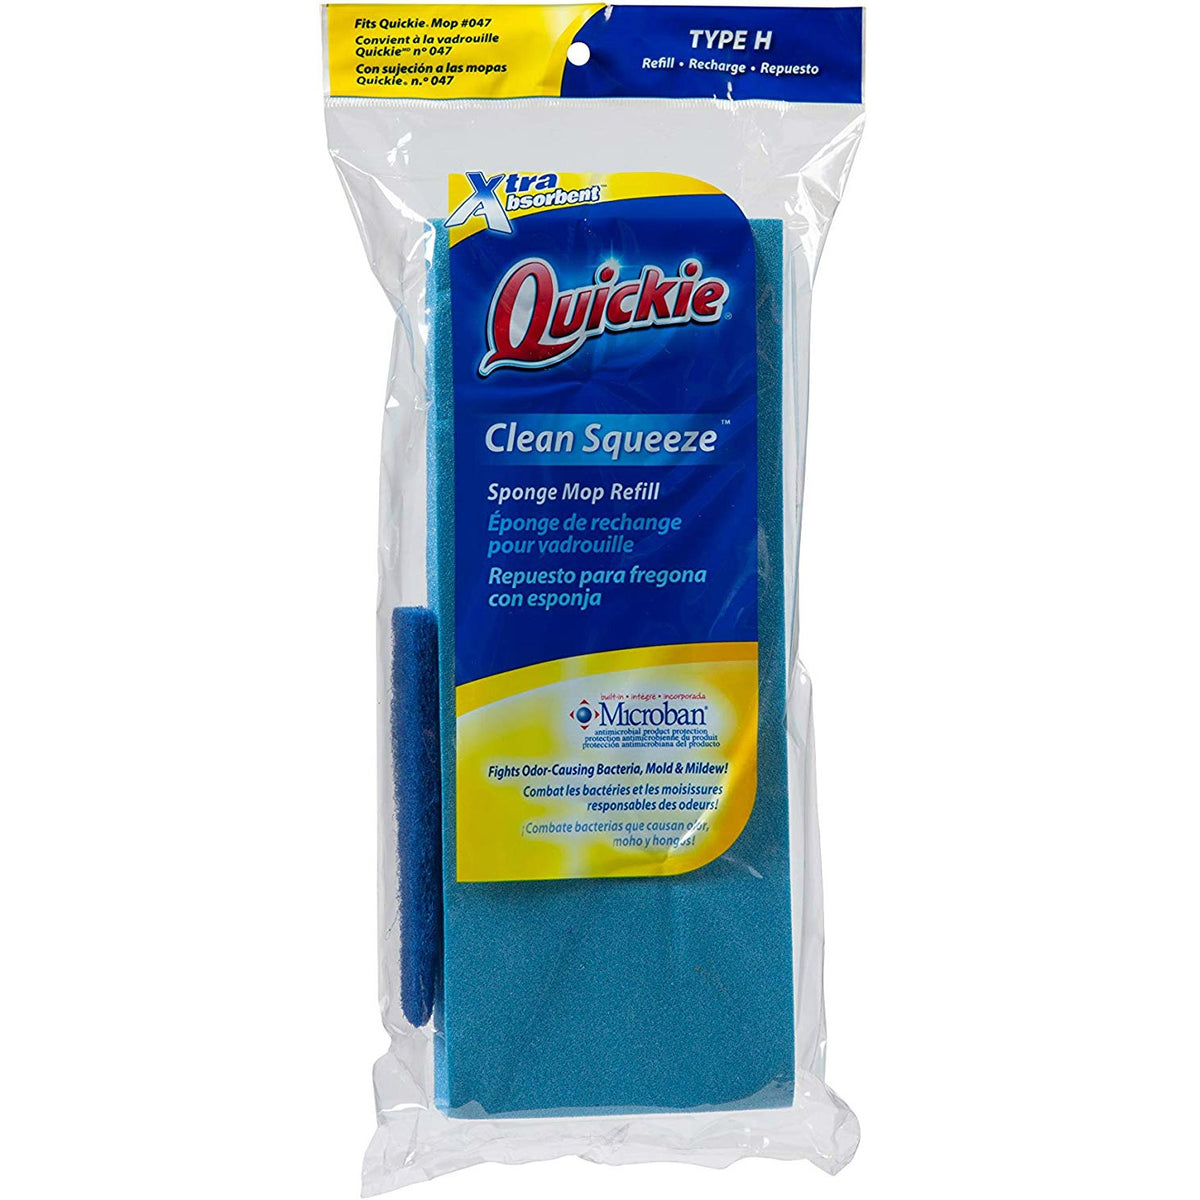 Quickie 472MB Dust Mop Refill, Blue